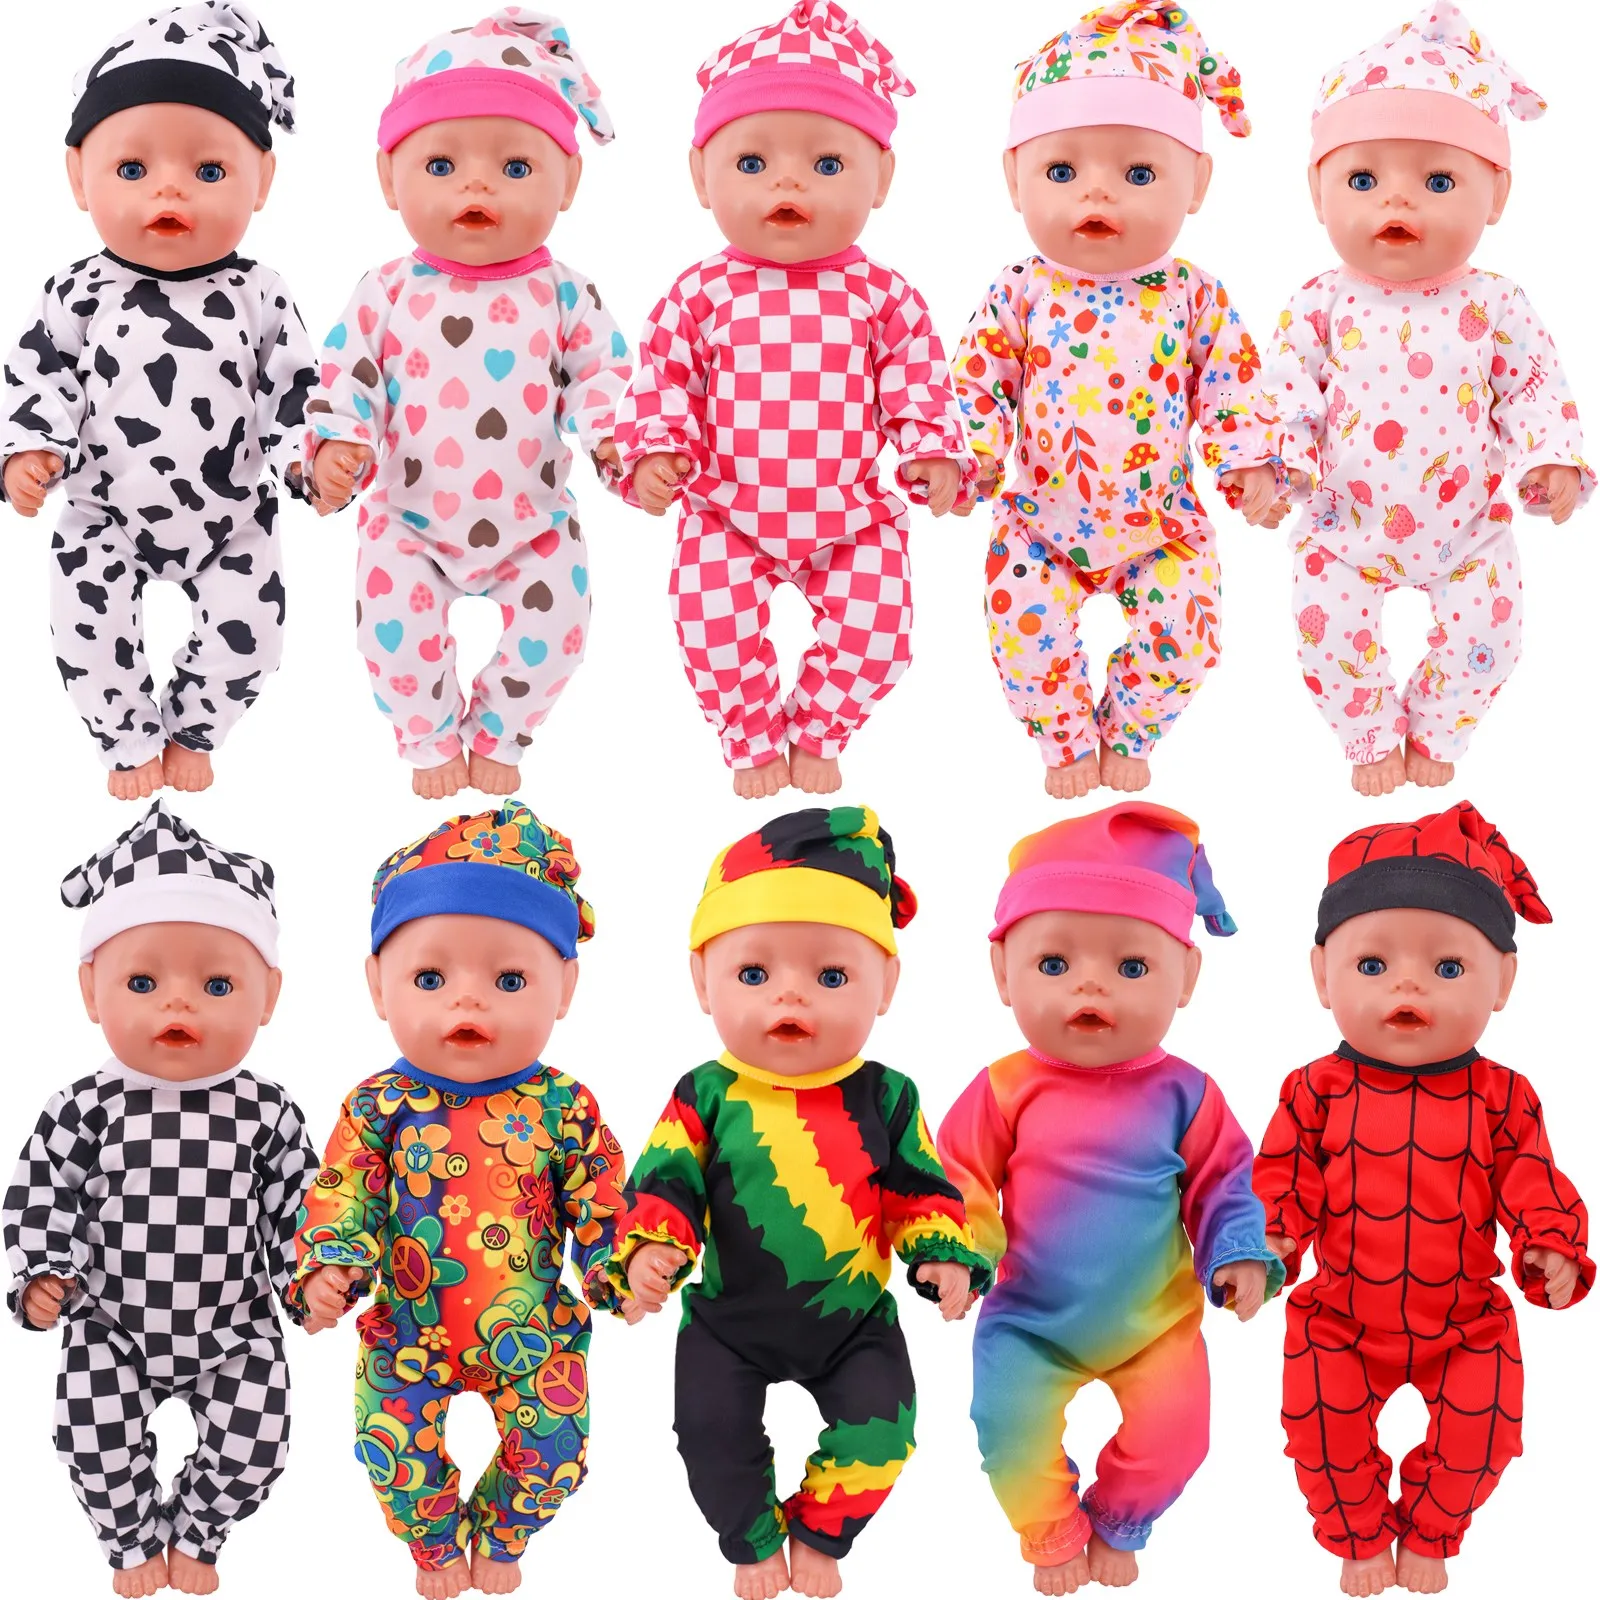 Doll Clothes Long One Piece Pajamas + Nightcap For 18Inch American&43Cm Baby New Born Doll Accessories Nenuco Sleeping Blanket